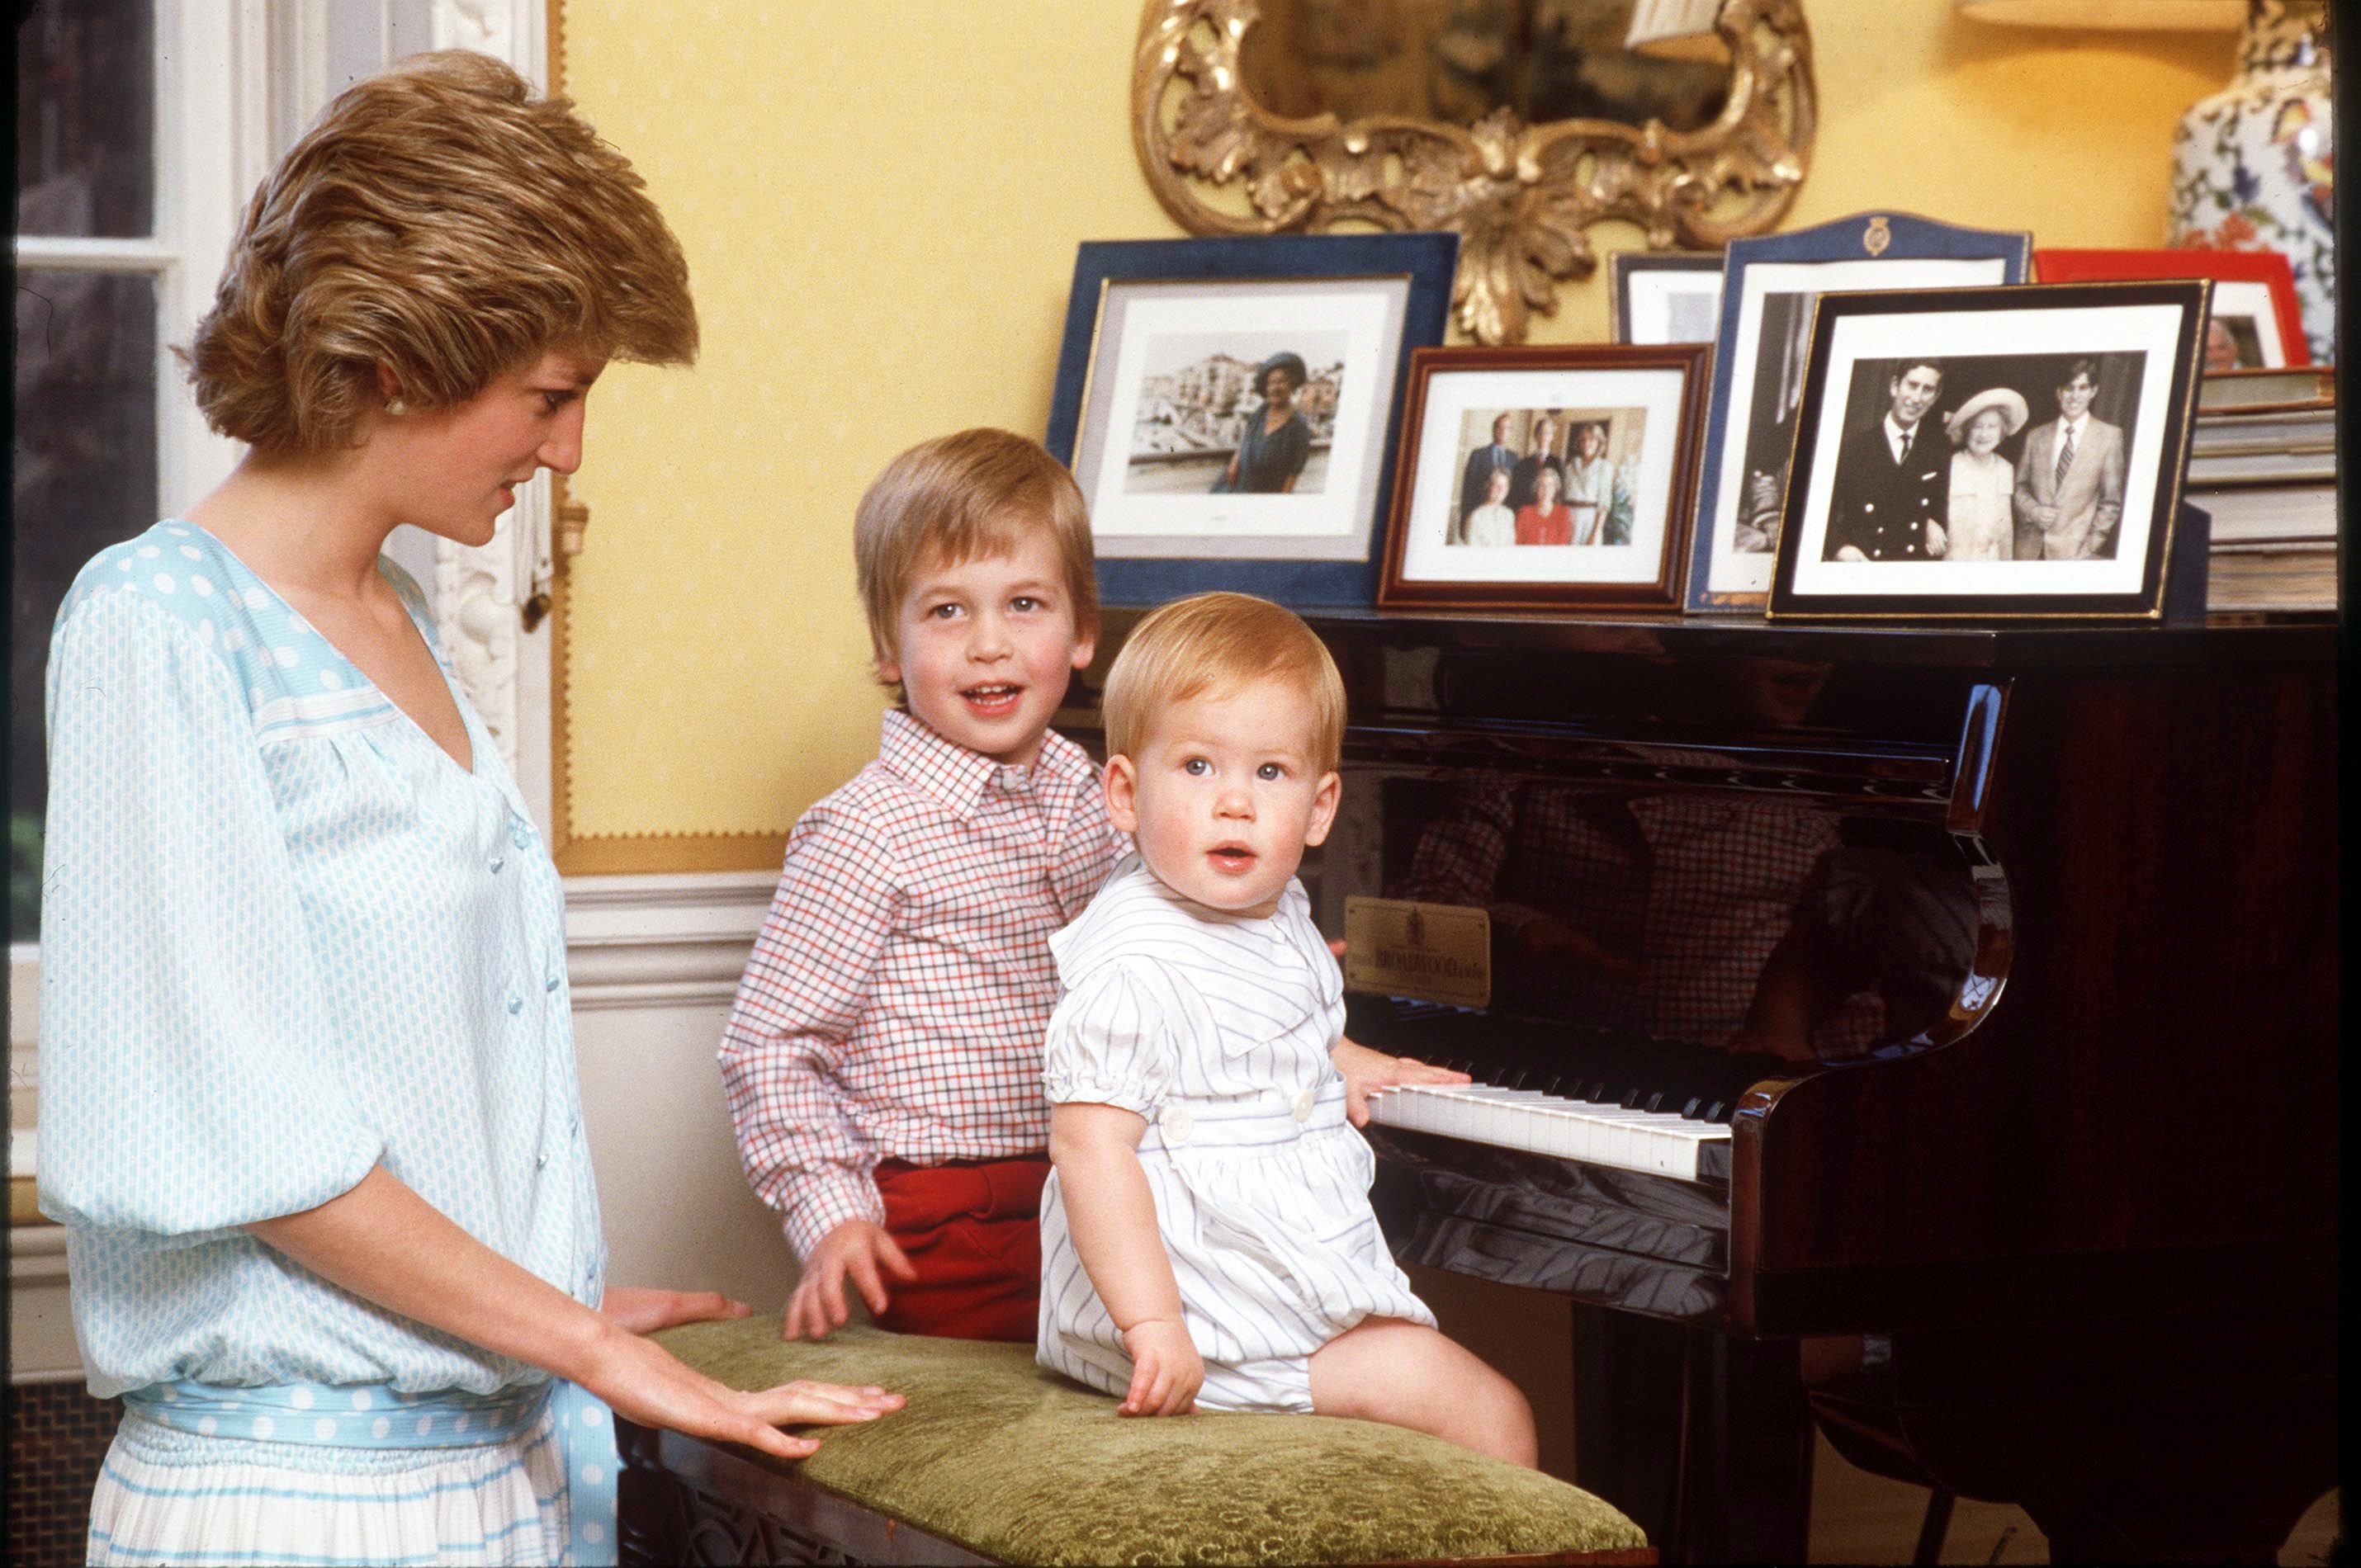     Princess Diana with Prince William and Prince Harry at the piano at home at Kensington Palace in 1985 |  Source: Getty Images